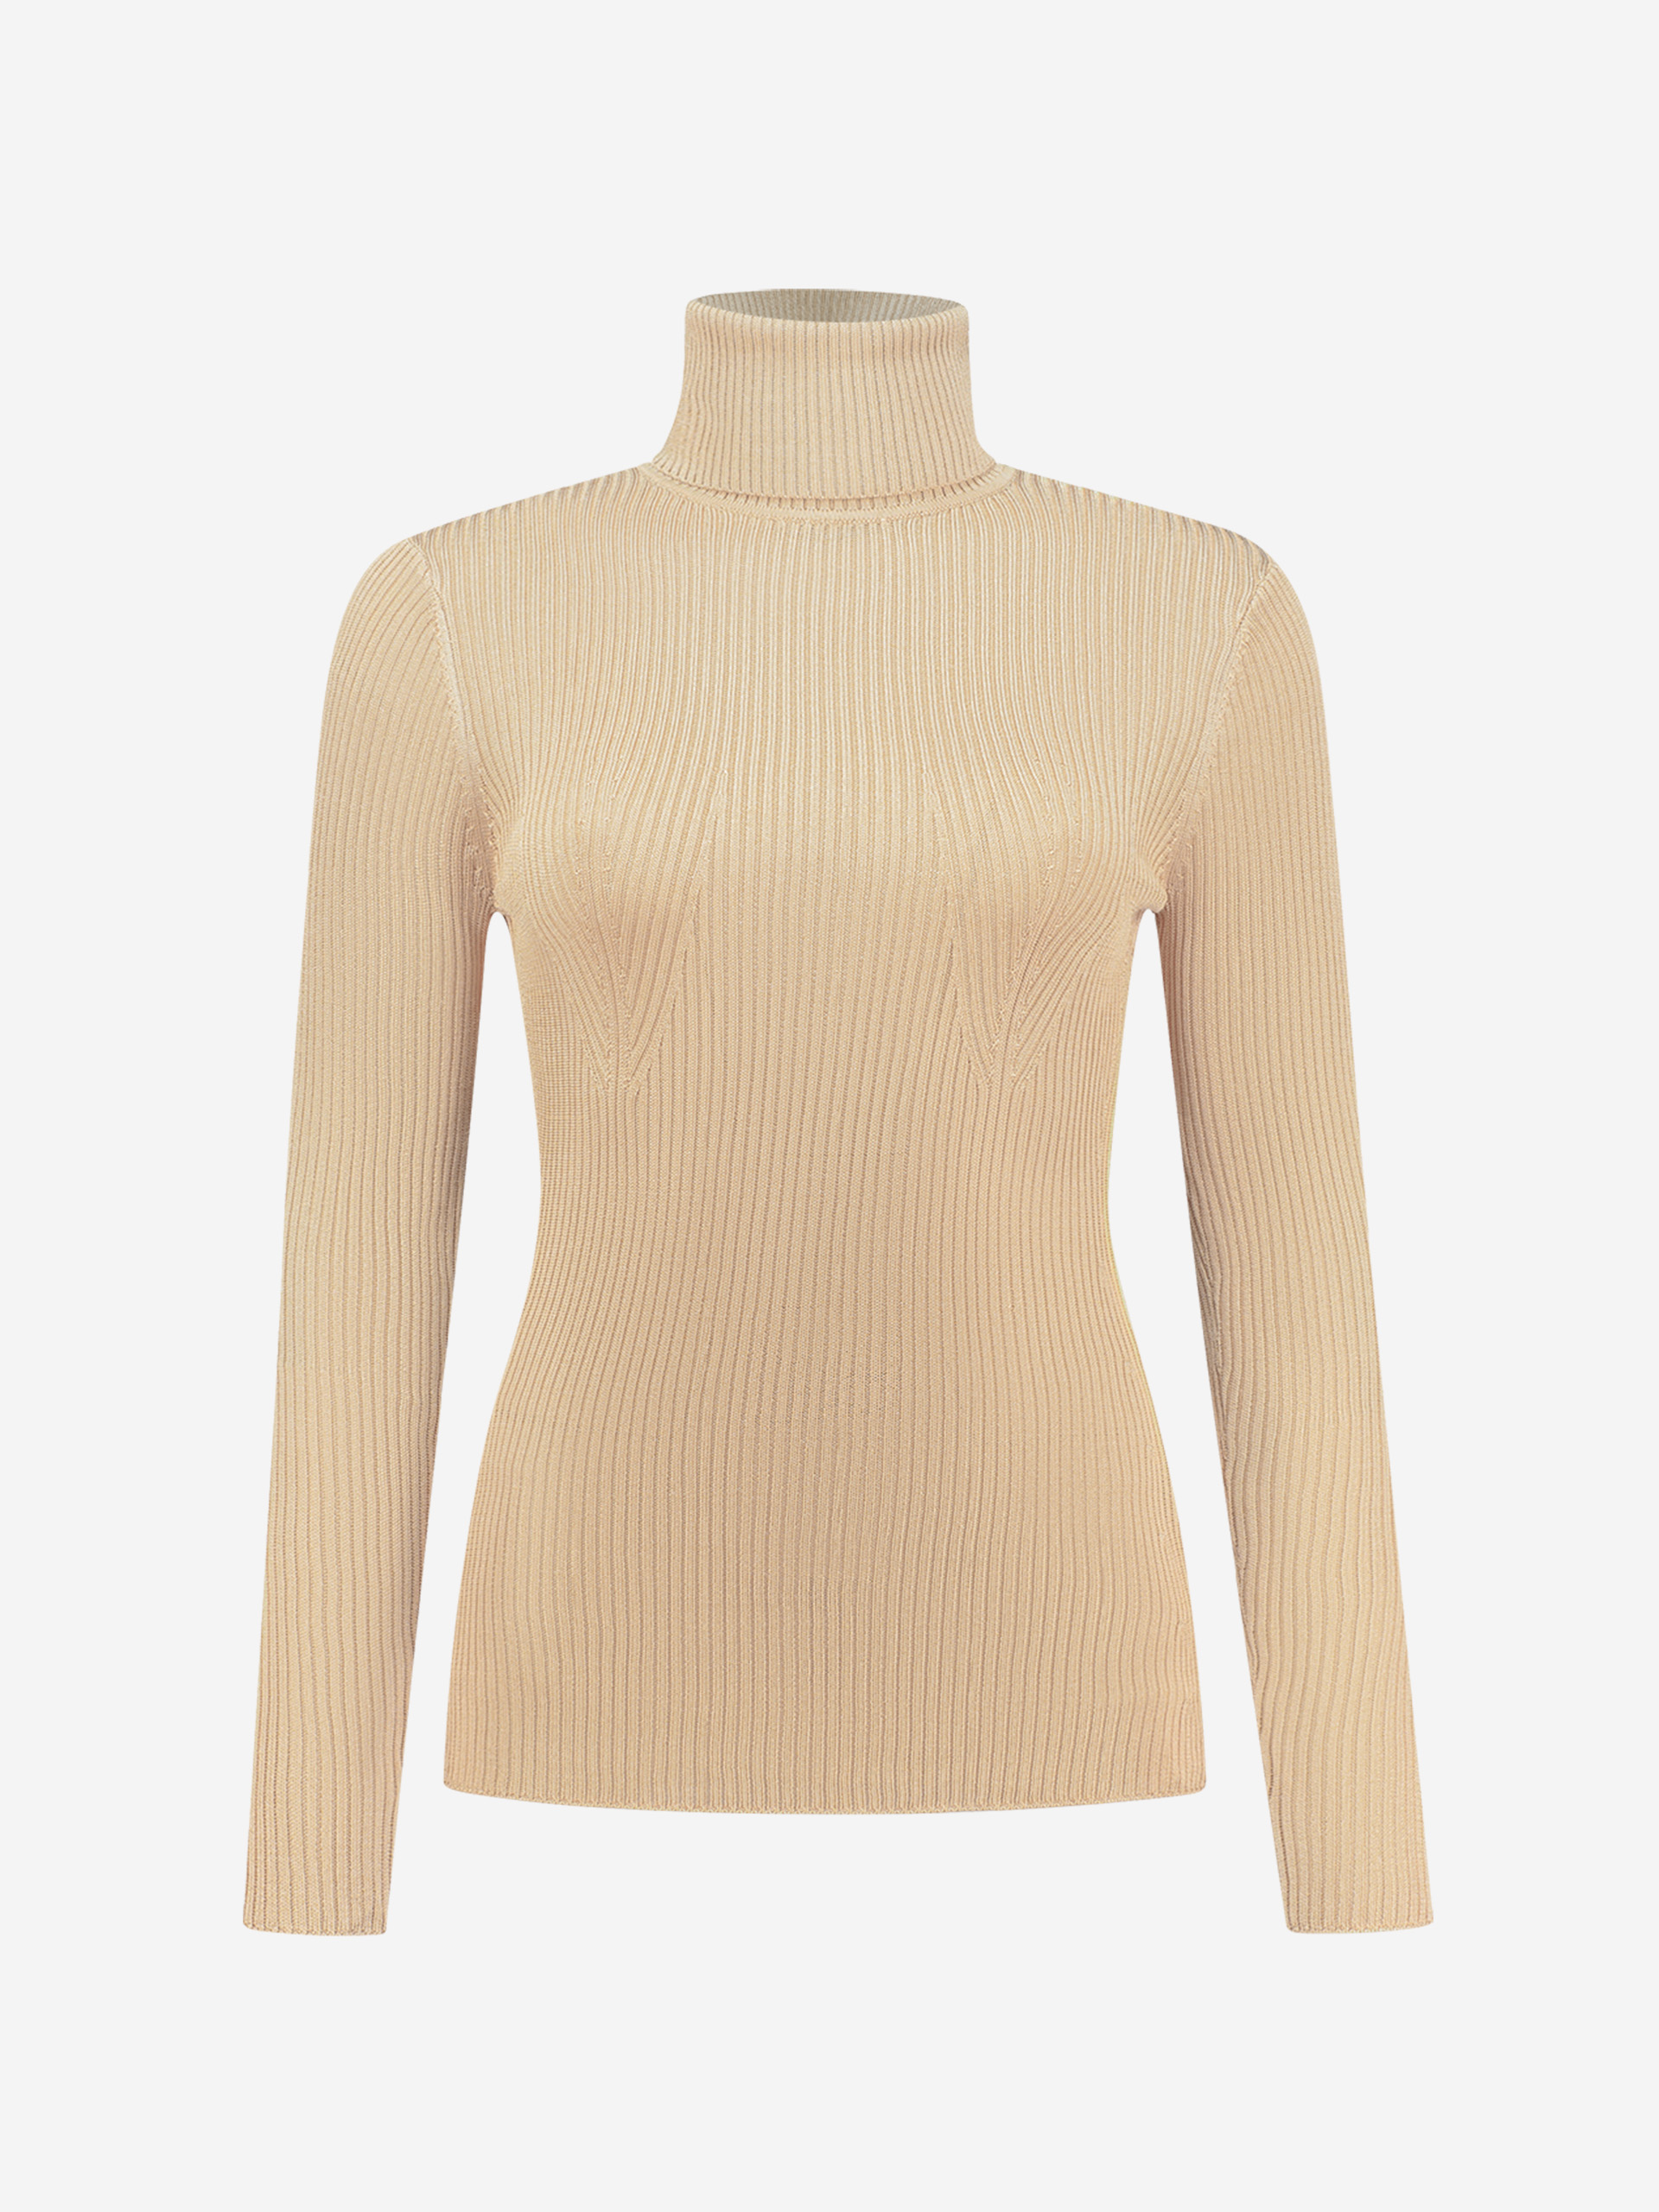 Basic fitted turtleneck top with long sleeves 